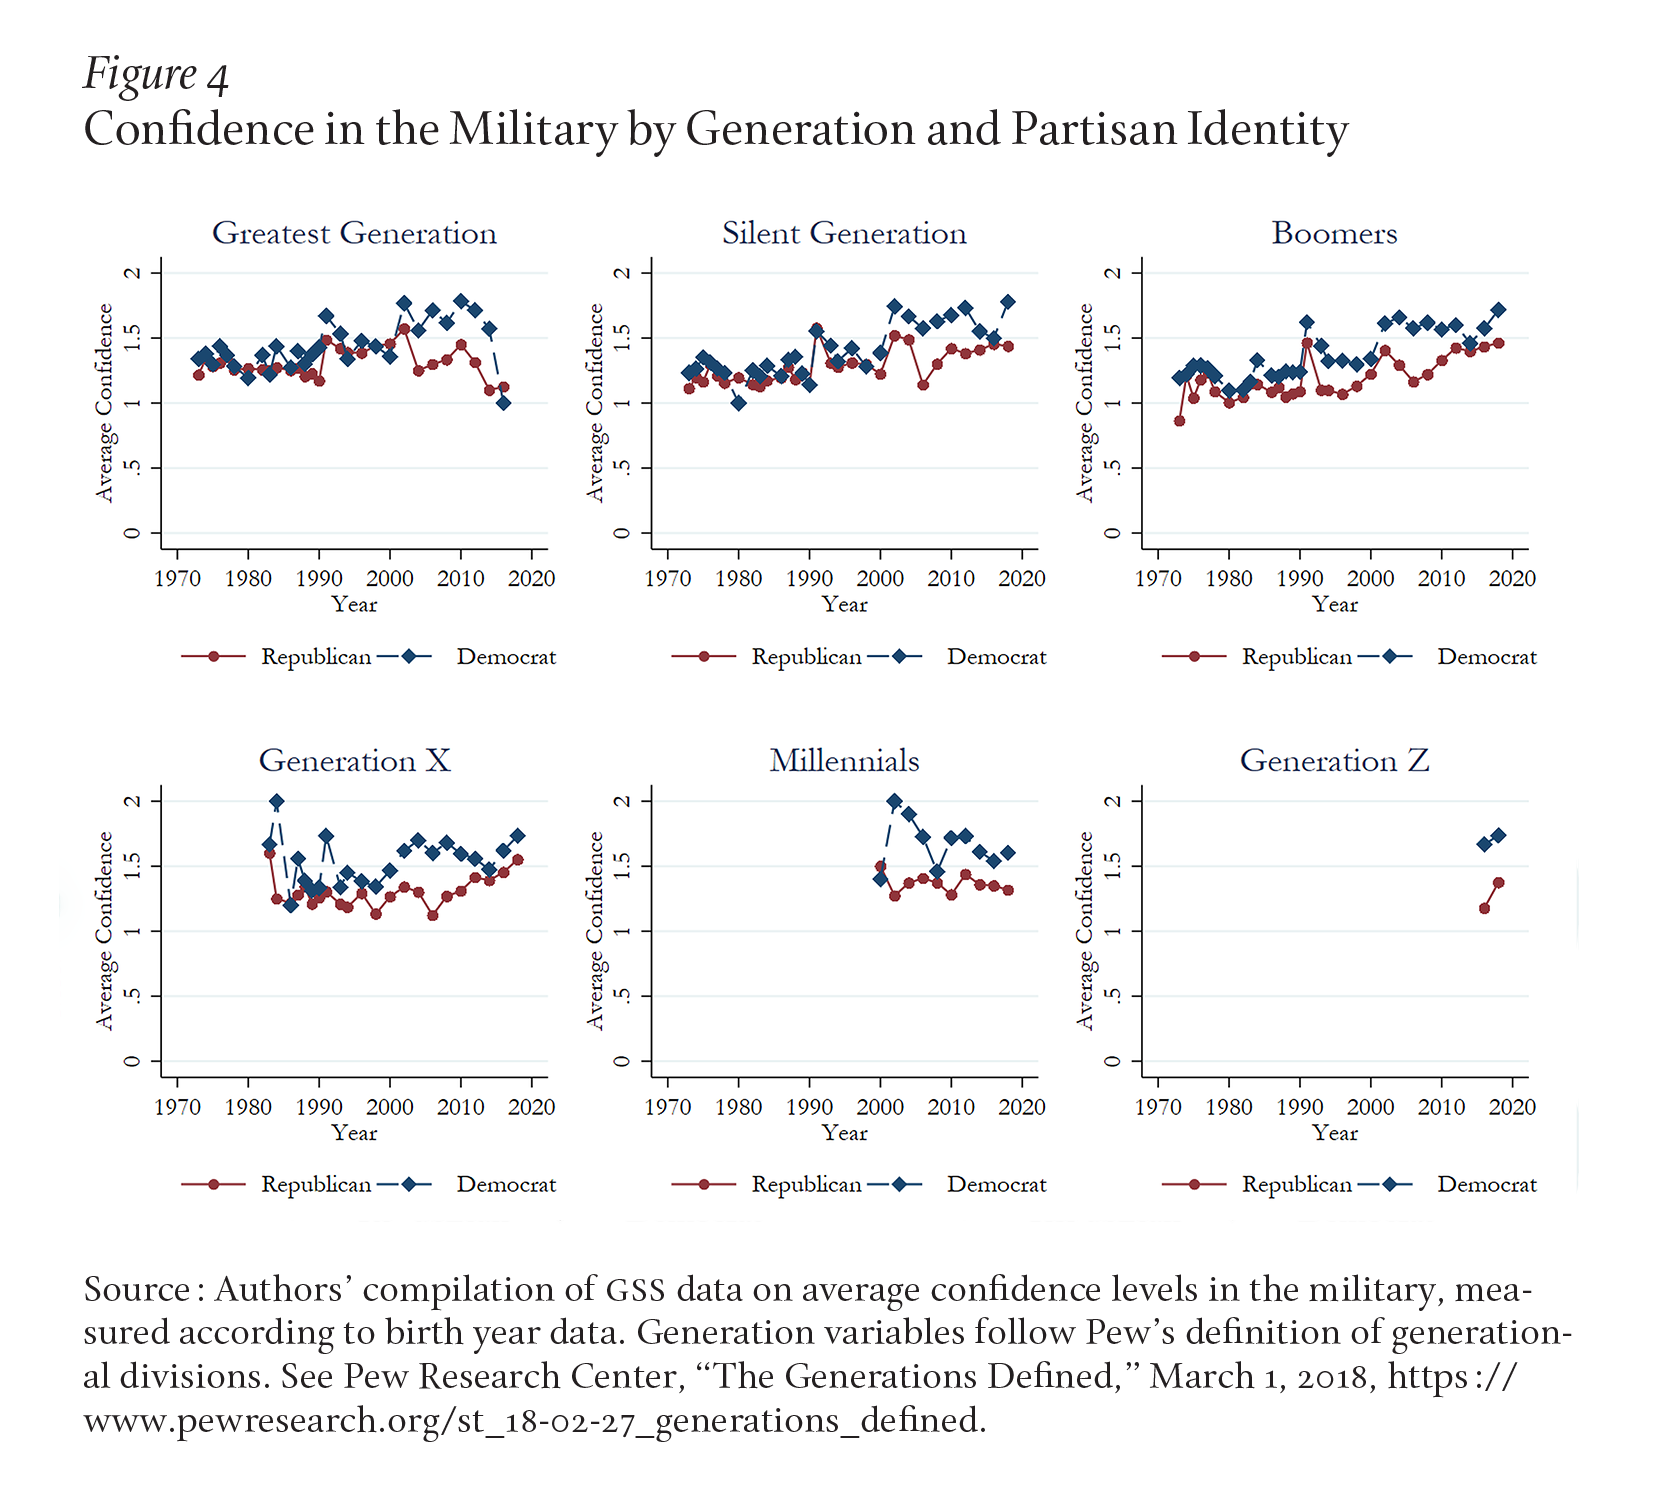 Figure 4 shows that partisan polarization that has increasingly characterized American society for the last two decades also started much earlier for boomers, at least with respect to attitudes toward the military: significant differences between Democratic and Republican confidence in the military begin in the 1980s for boomers and the early 1990s for Generation X. Conversely, the partisan divide is only evident in the silent generation starting in the year 2000.